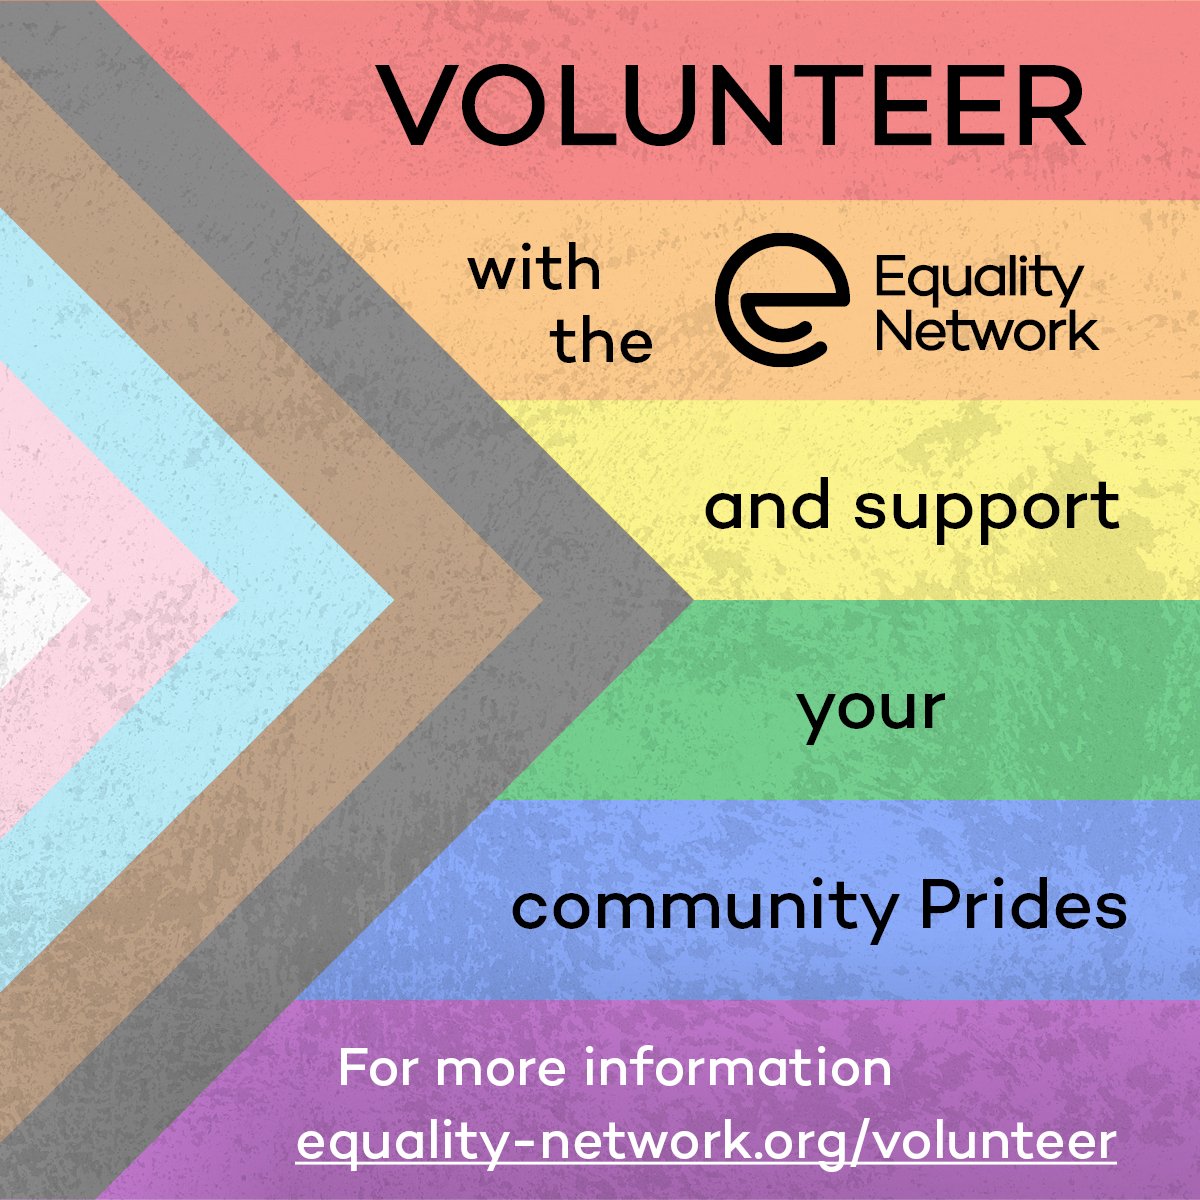 Volunteer with the Equality Network! 🏳️‍🌈🏳️‍⚧️🌟 Join us at Pride events across Scotland this summer and learn new skills, make new connections and most importantly, make a difference. For more information and to sign up, please head to: equality-network.org/volunteer/